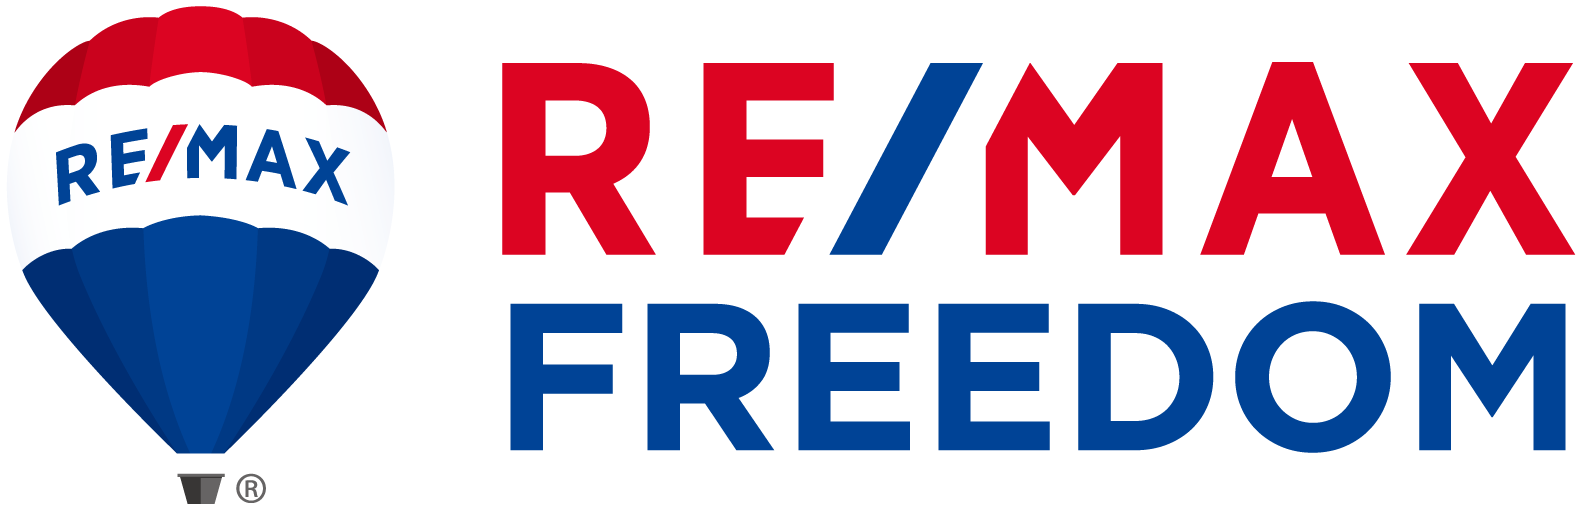 RE/MAX FREEDOM